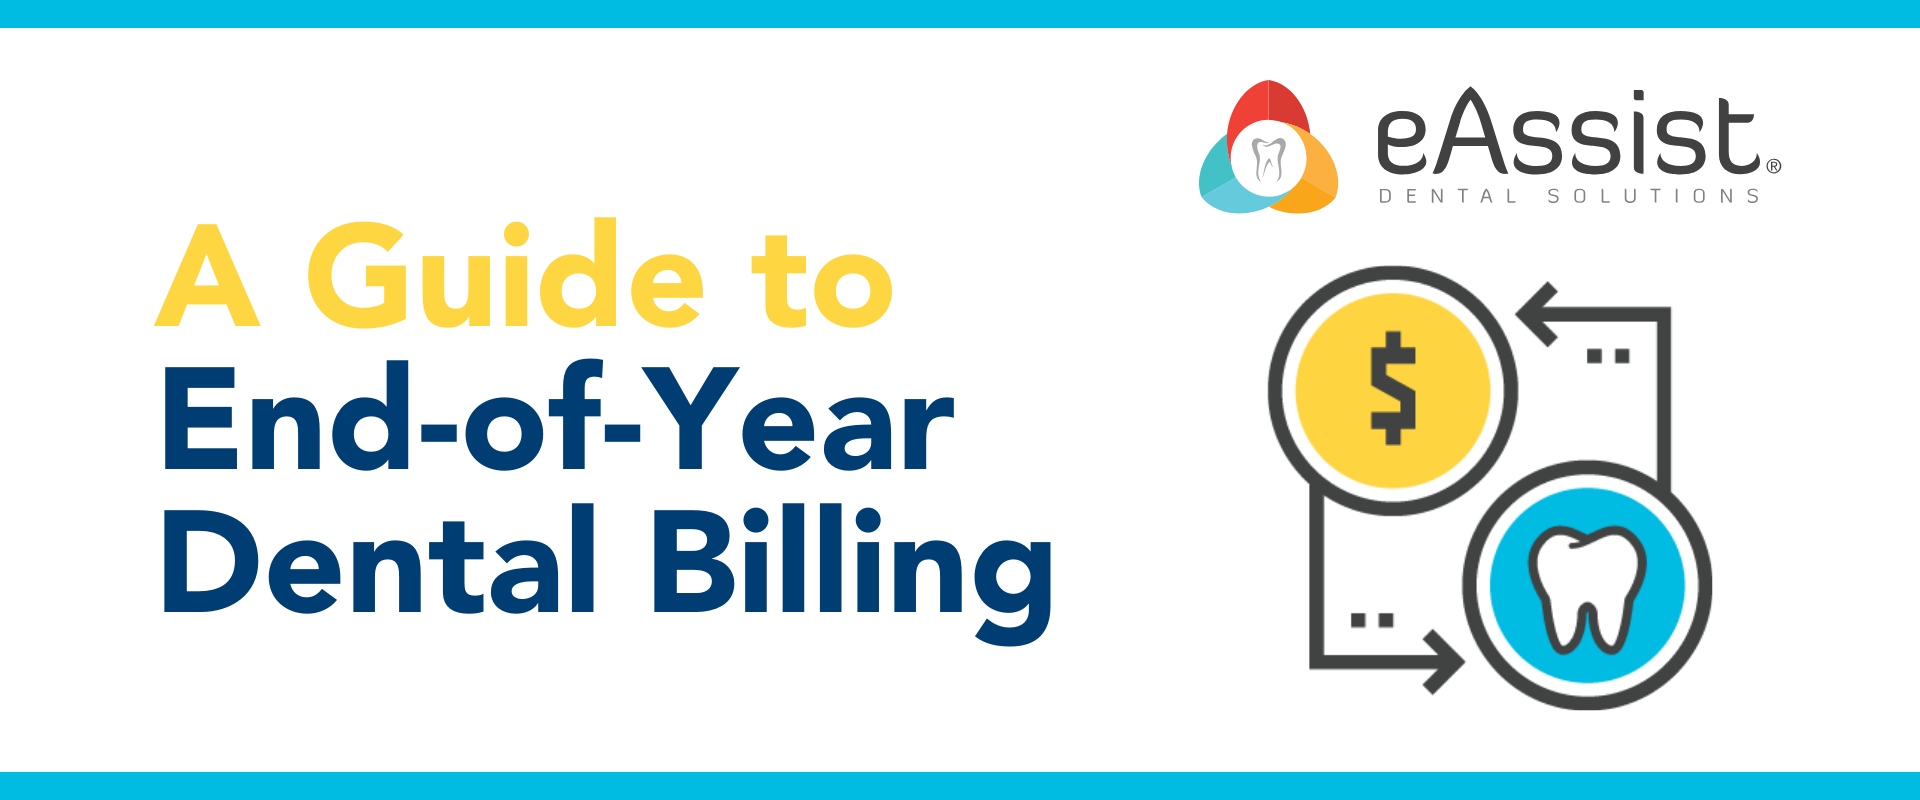 A Guide to End of Year Dental Billing